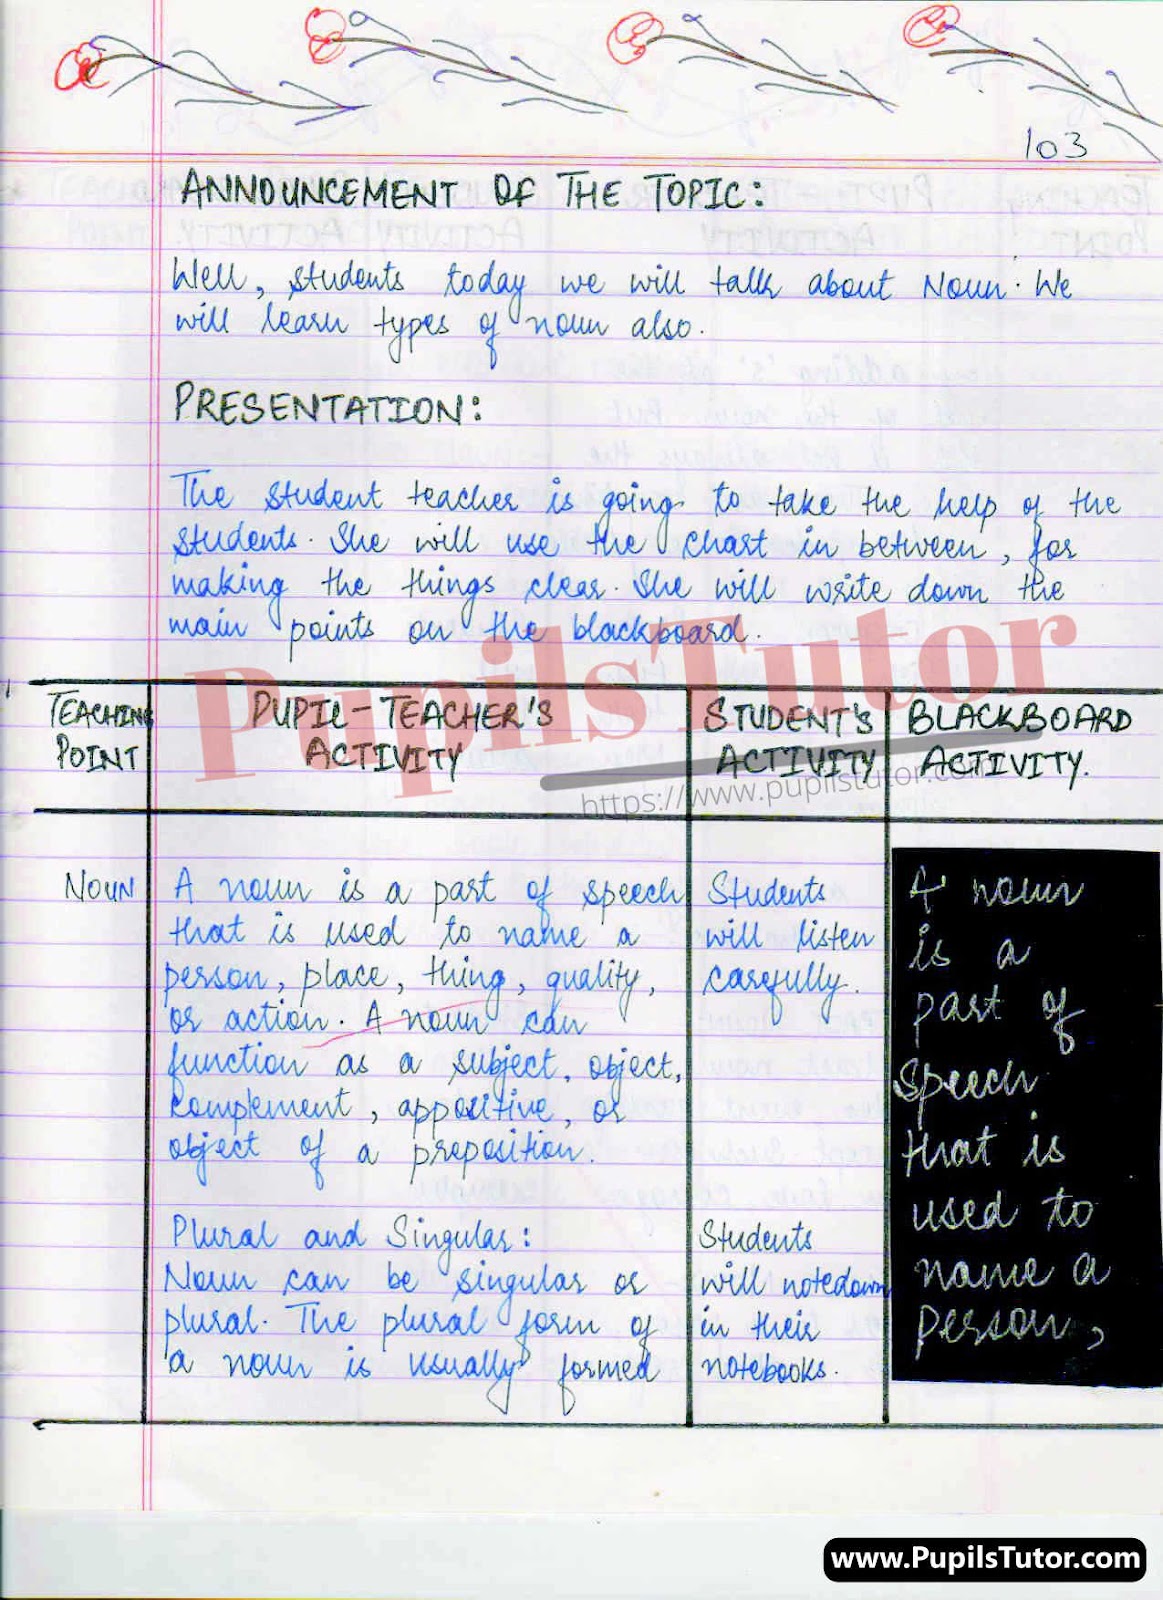 English Lesson Plan On Noun For Class/Grade 6 For CBSE NCERT School And College Teachers  – (Page And Image Number 3) – www.pupilstutor.com